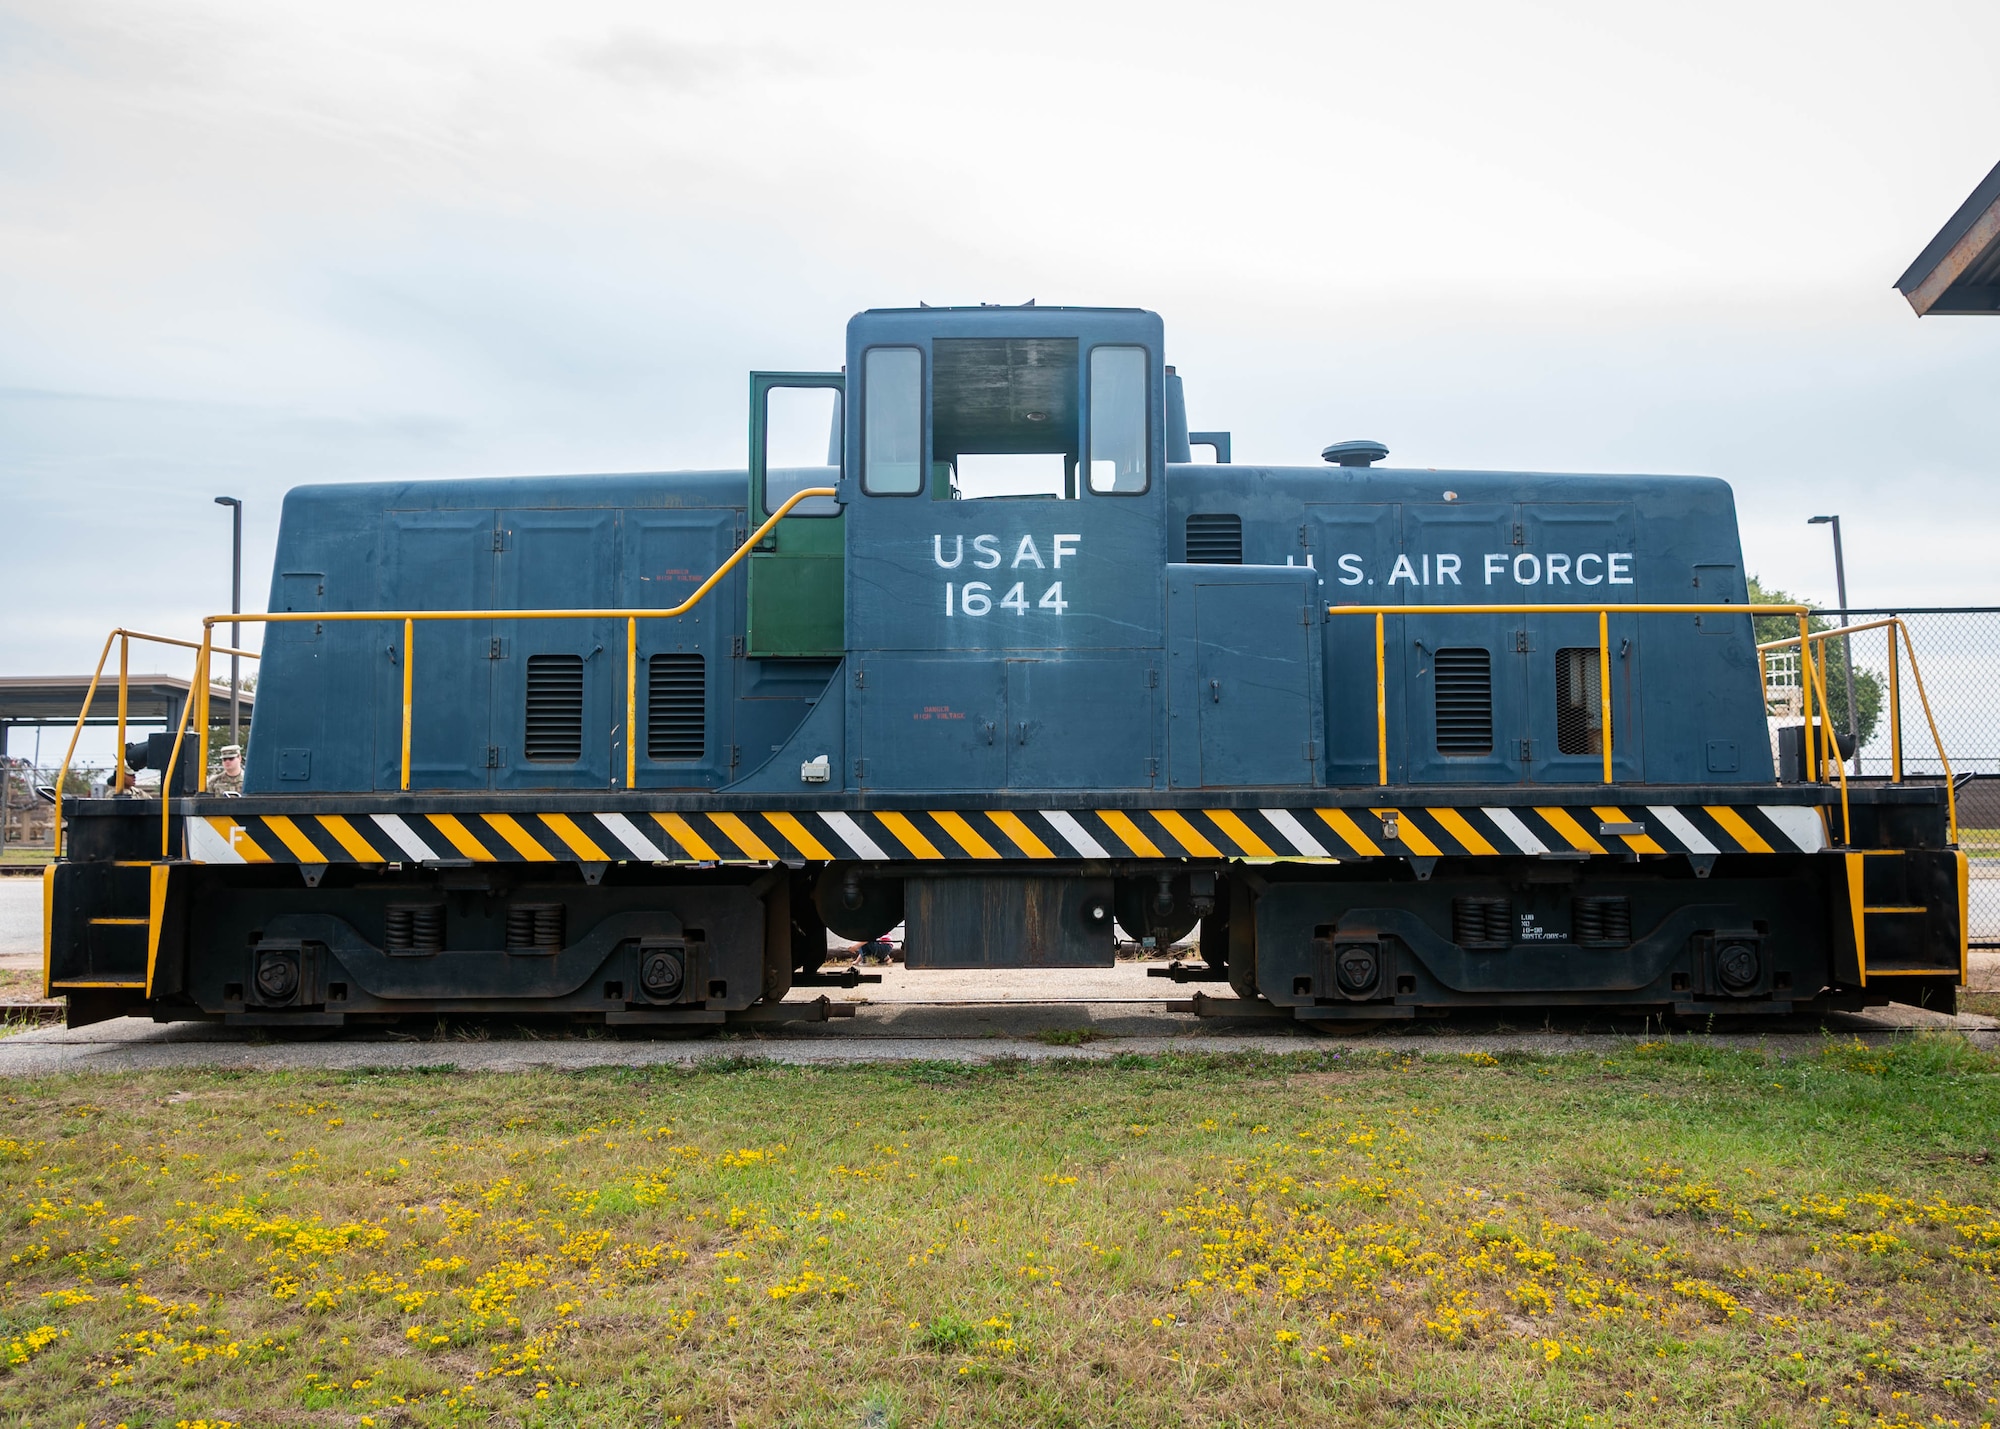 Full view of locomotive formerly assigned to Shaw Air Force Base.